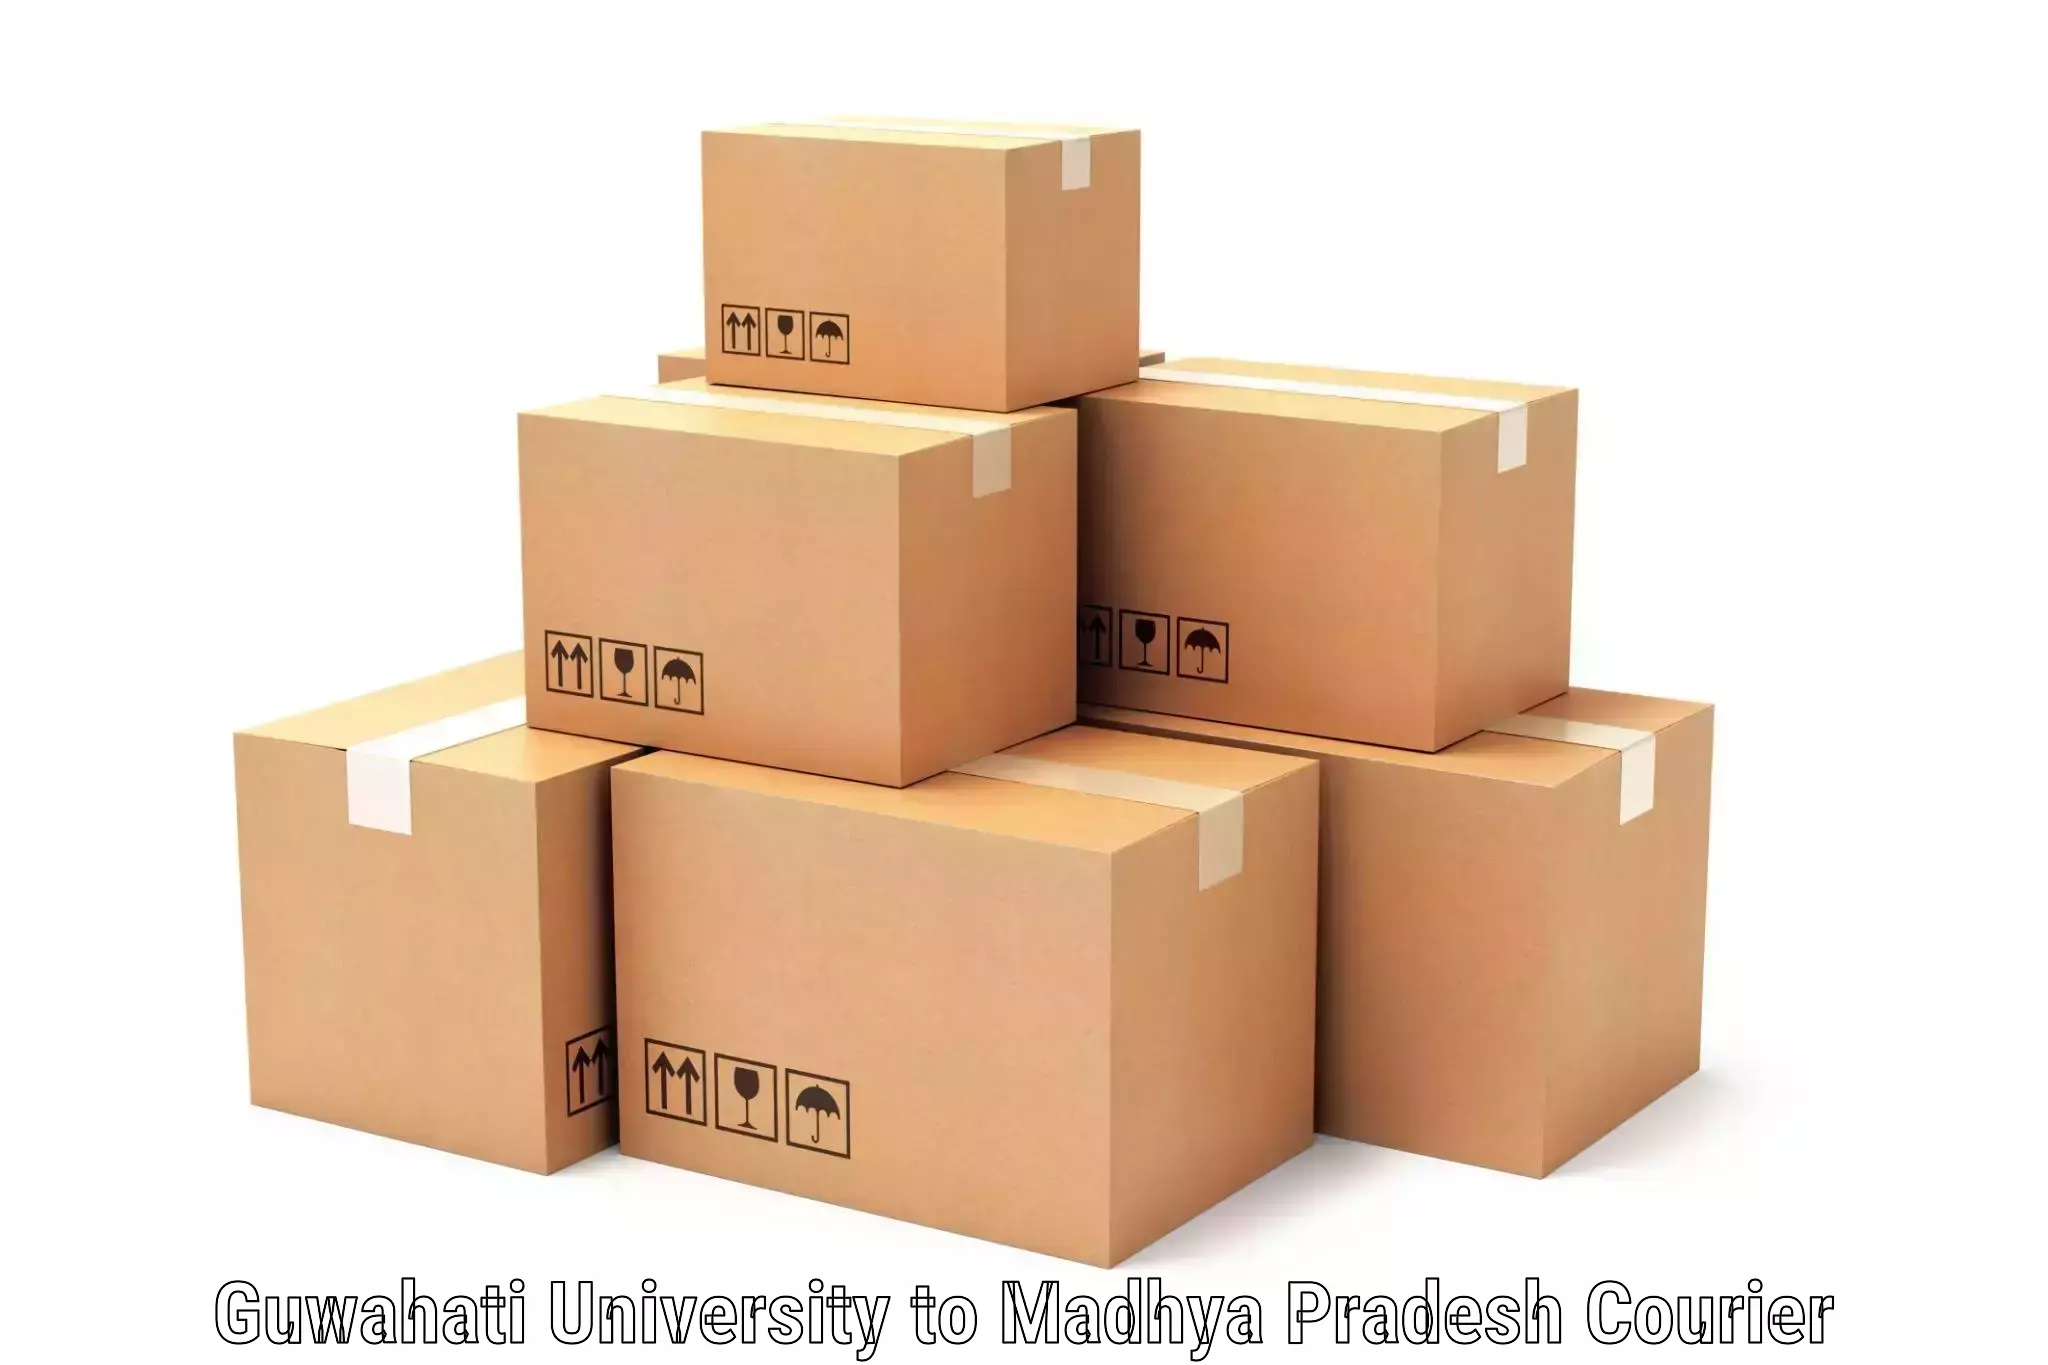 Tailored delivery services Guwahati University to Gwalior